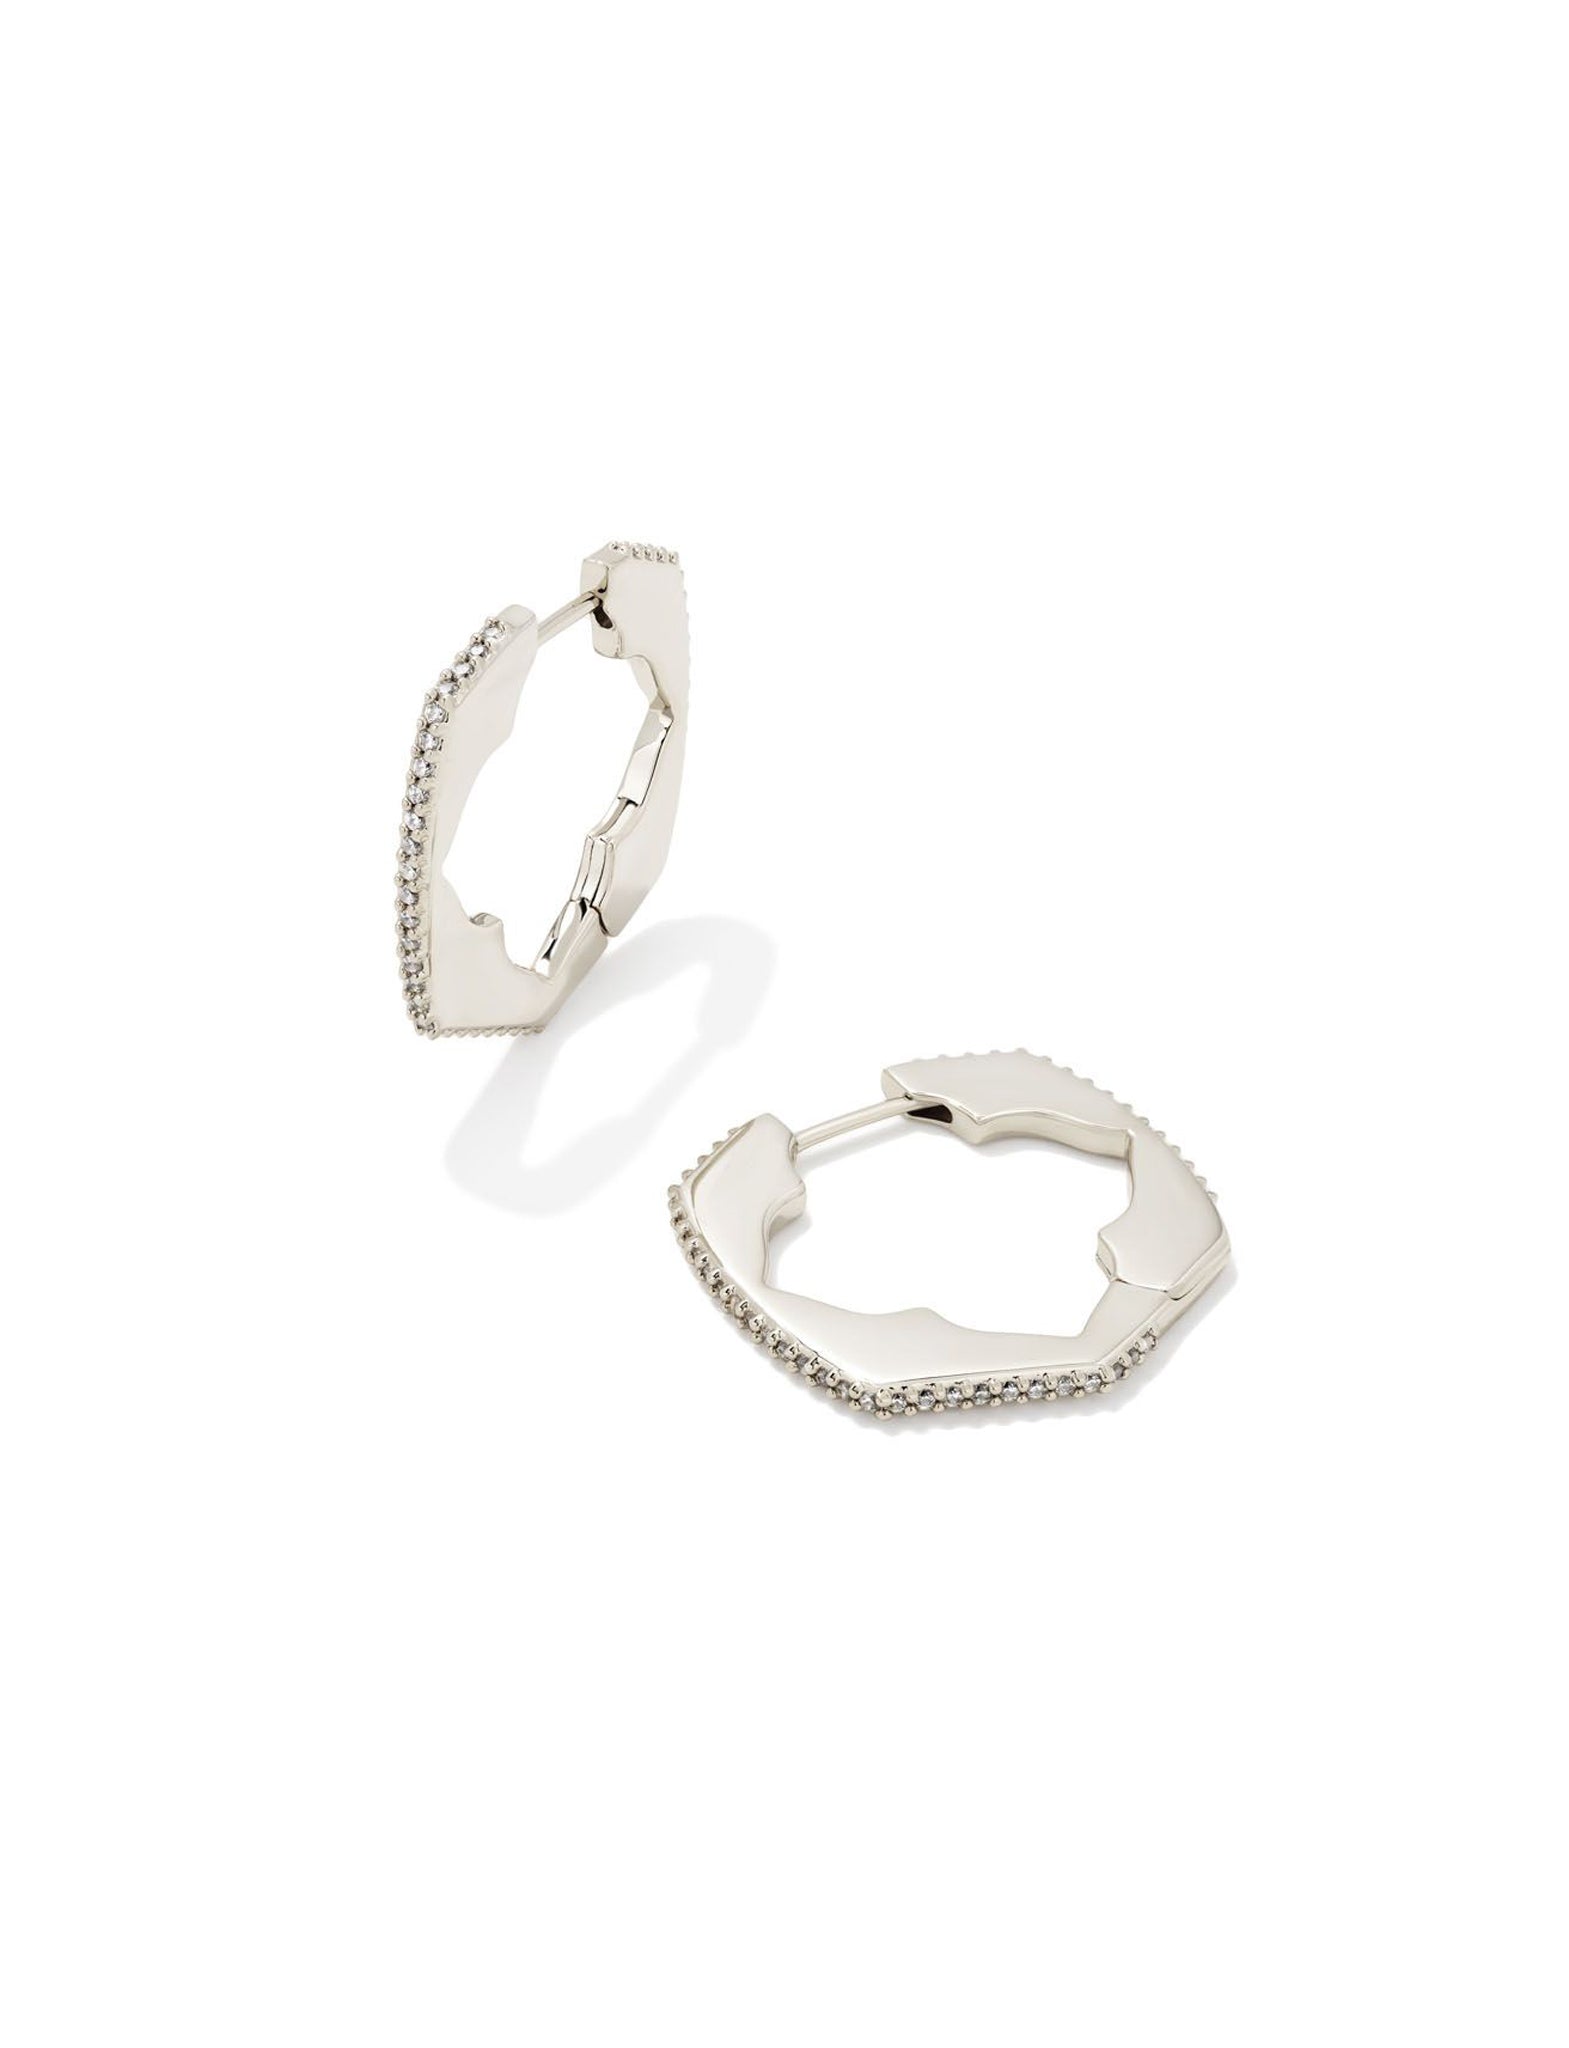 Kendra Scott Mallory Huggie Hoop Logo Earrings in White Crystal and Rhodium Plated